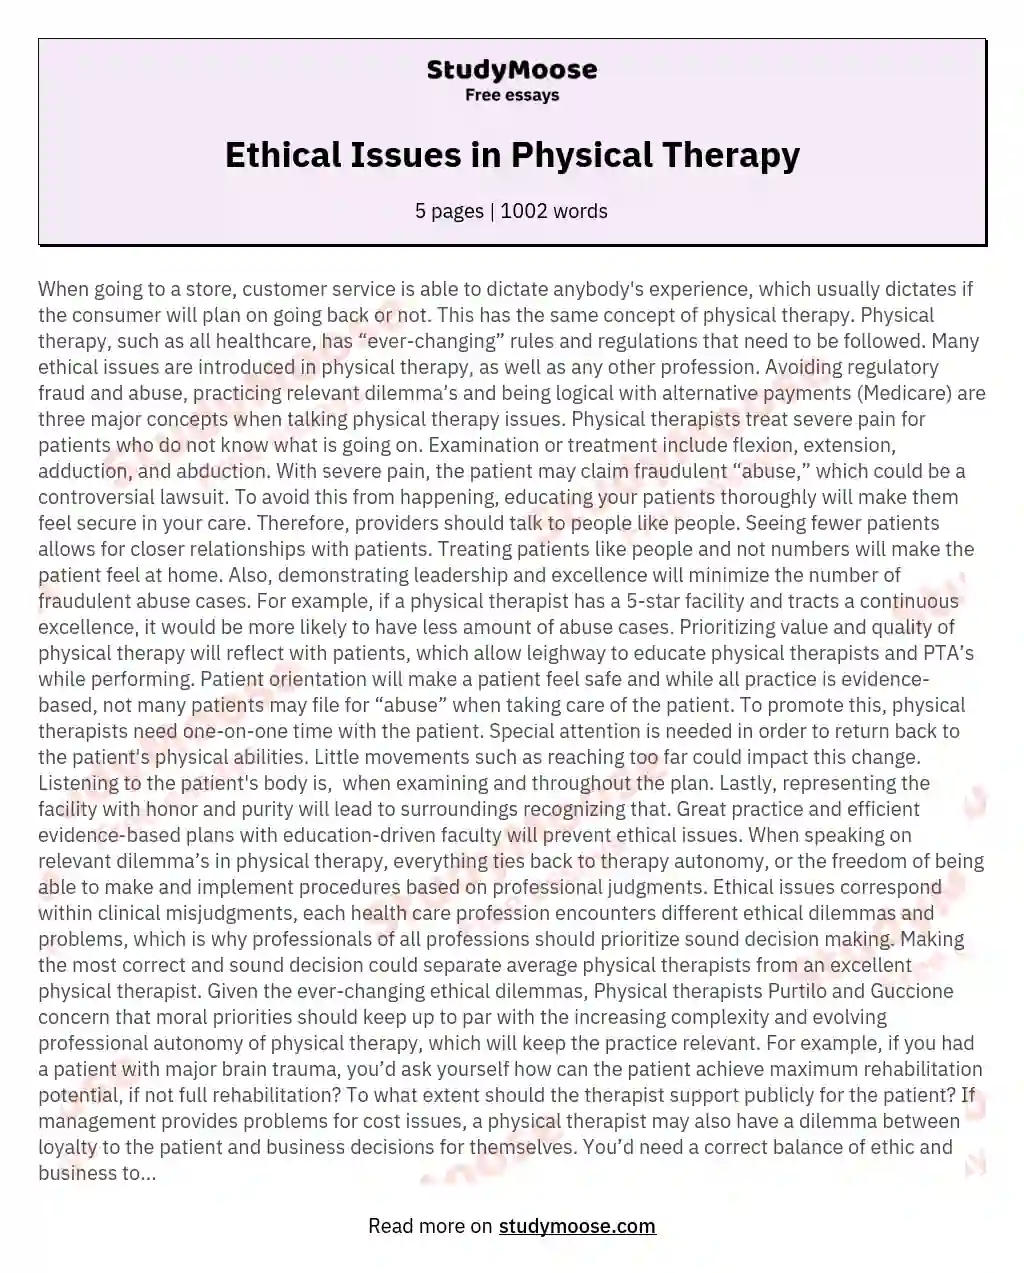 Ethical Issues in Physical Therapy essay